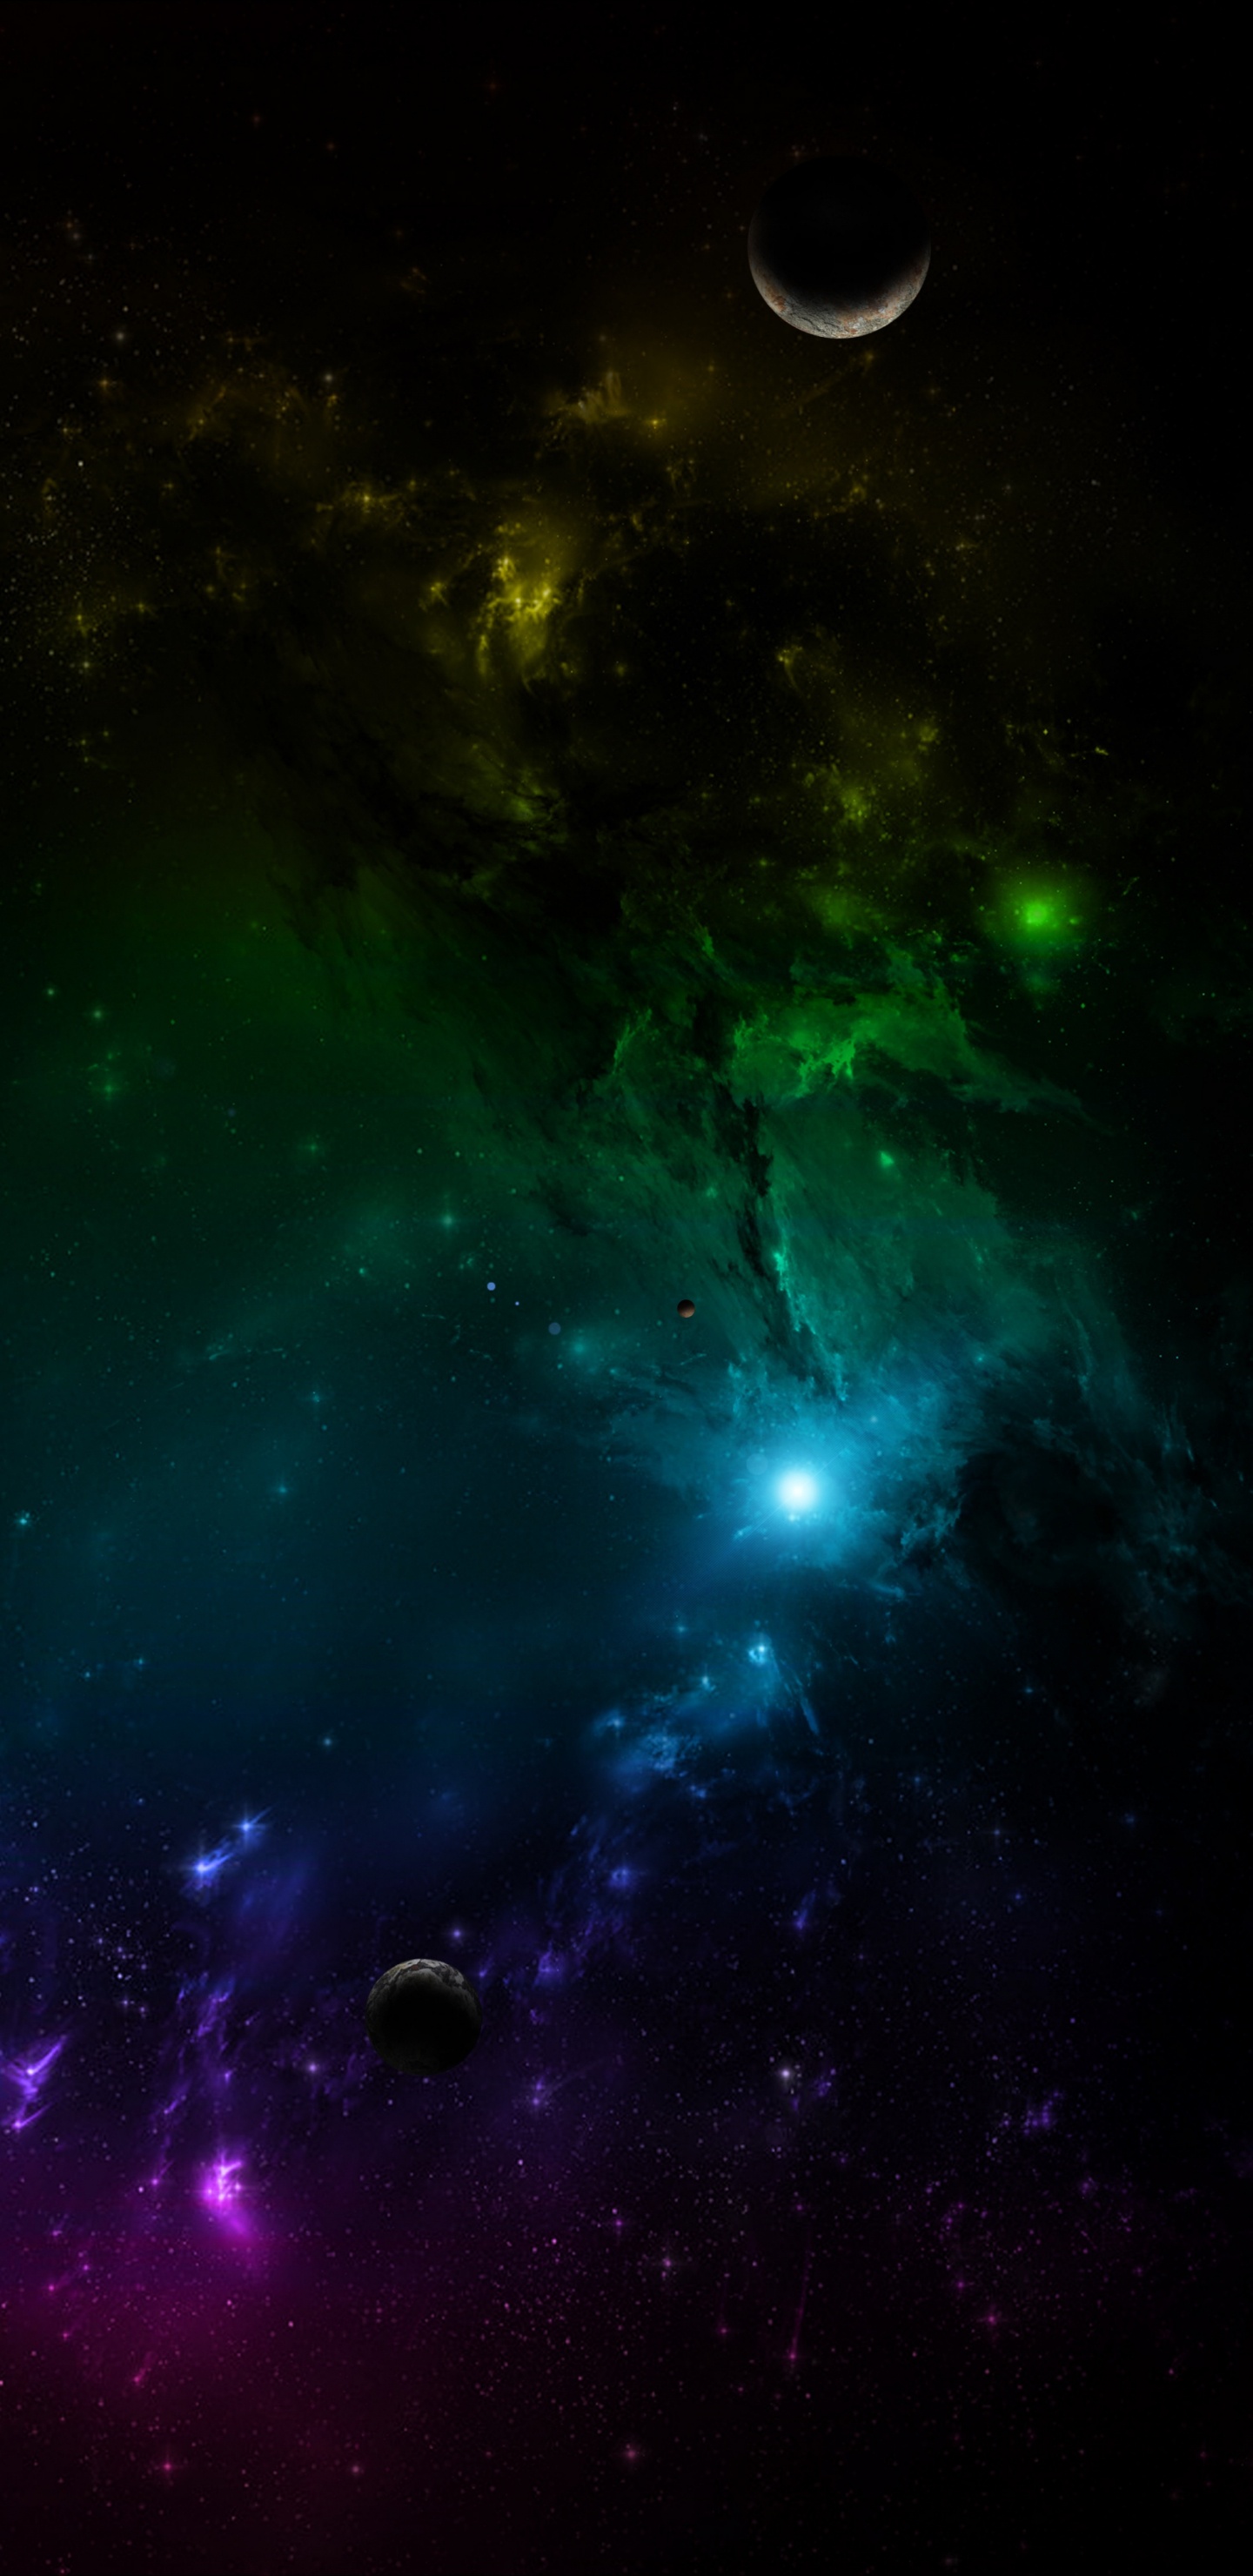 Green and Blue Galaxy Illustration. Wallpaper in 1440x2960 Resolution